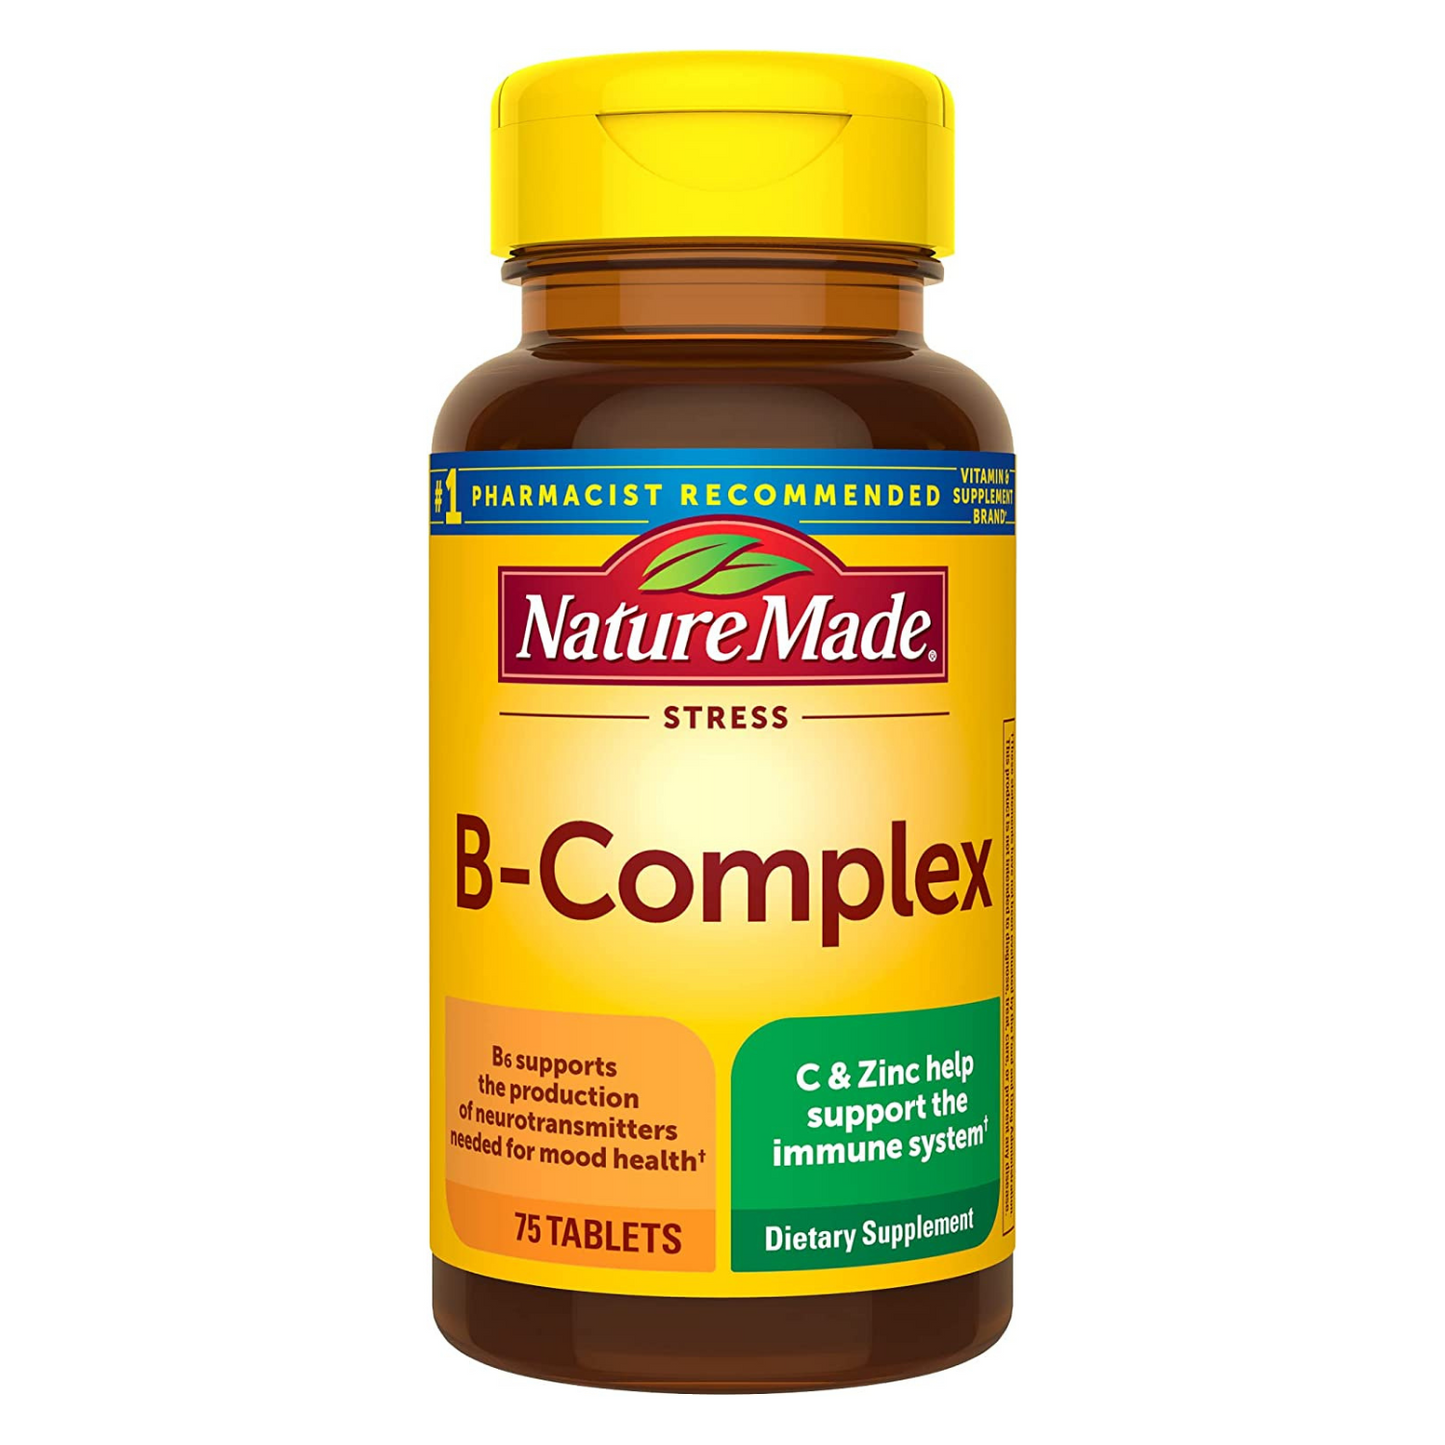 Nature Made - Stress B Complex with Vitamin C and Zinc - 75 Tablets